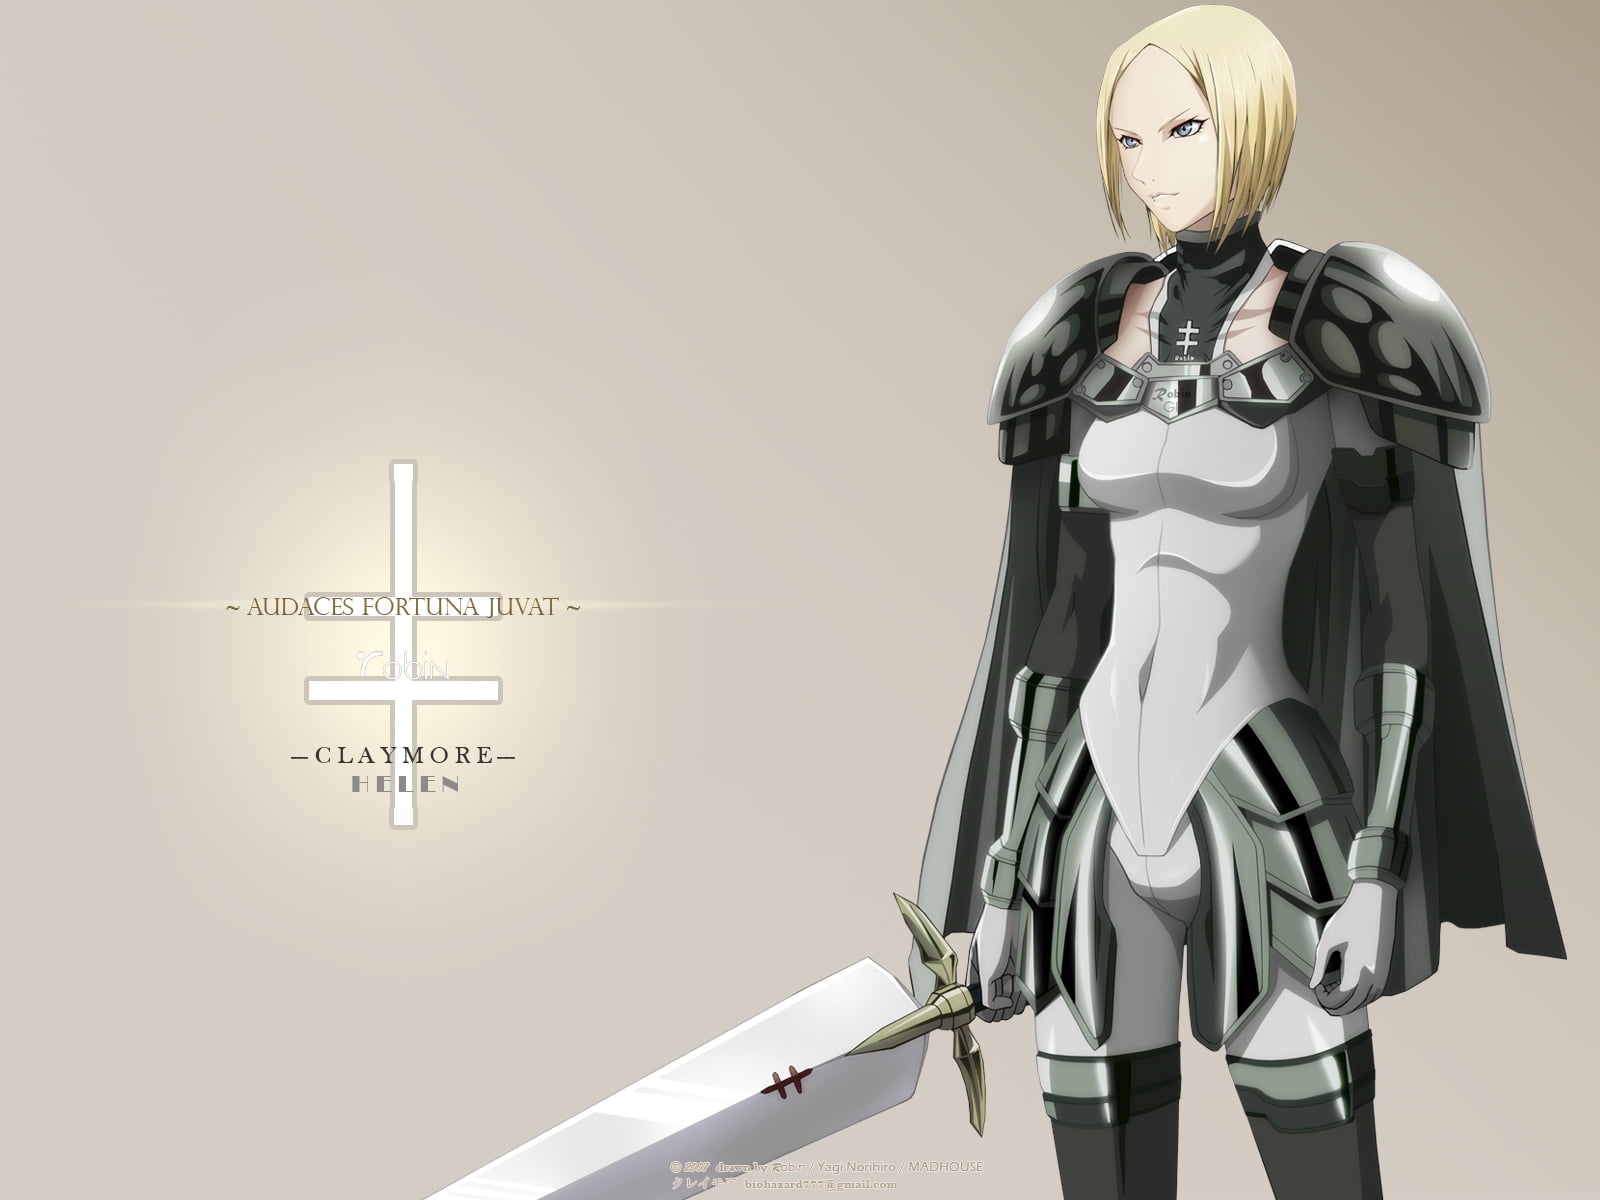 Claymore anime character illustration